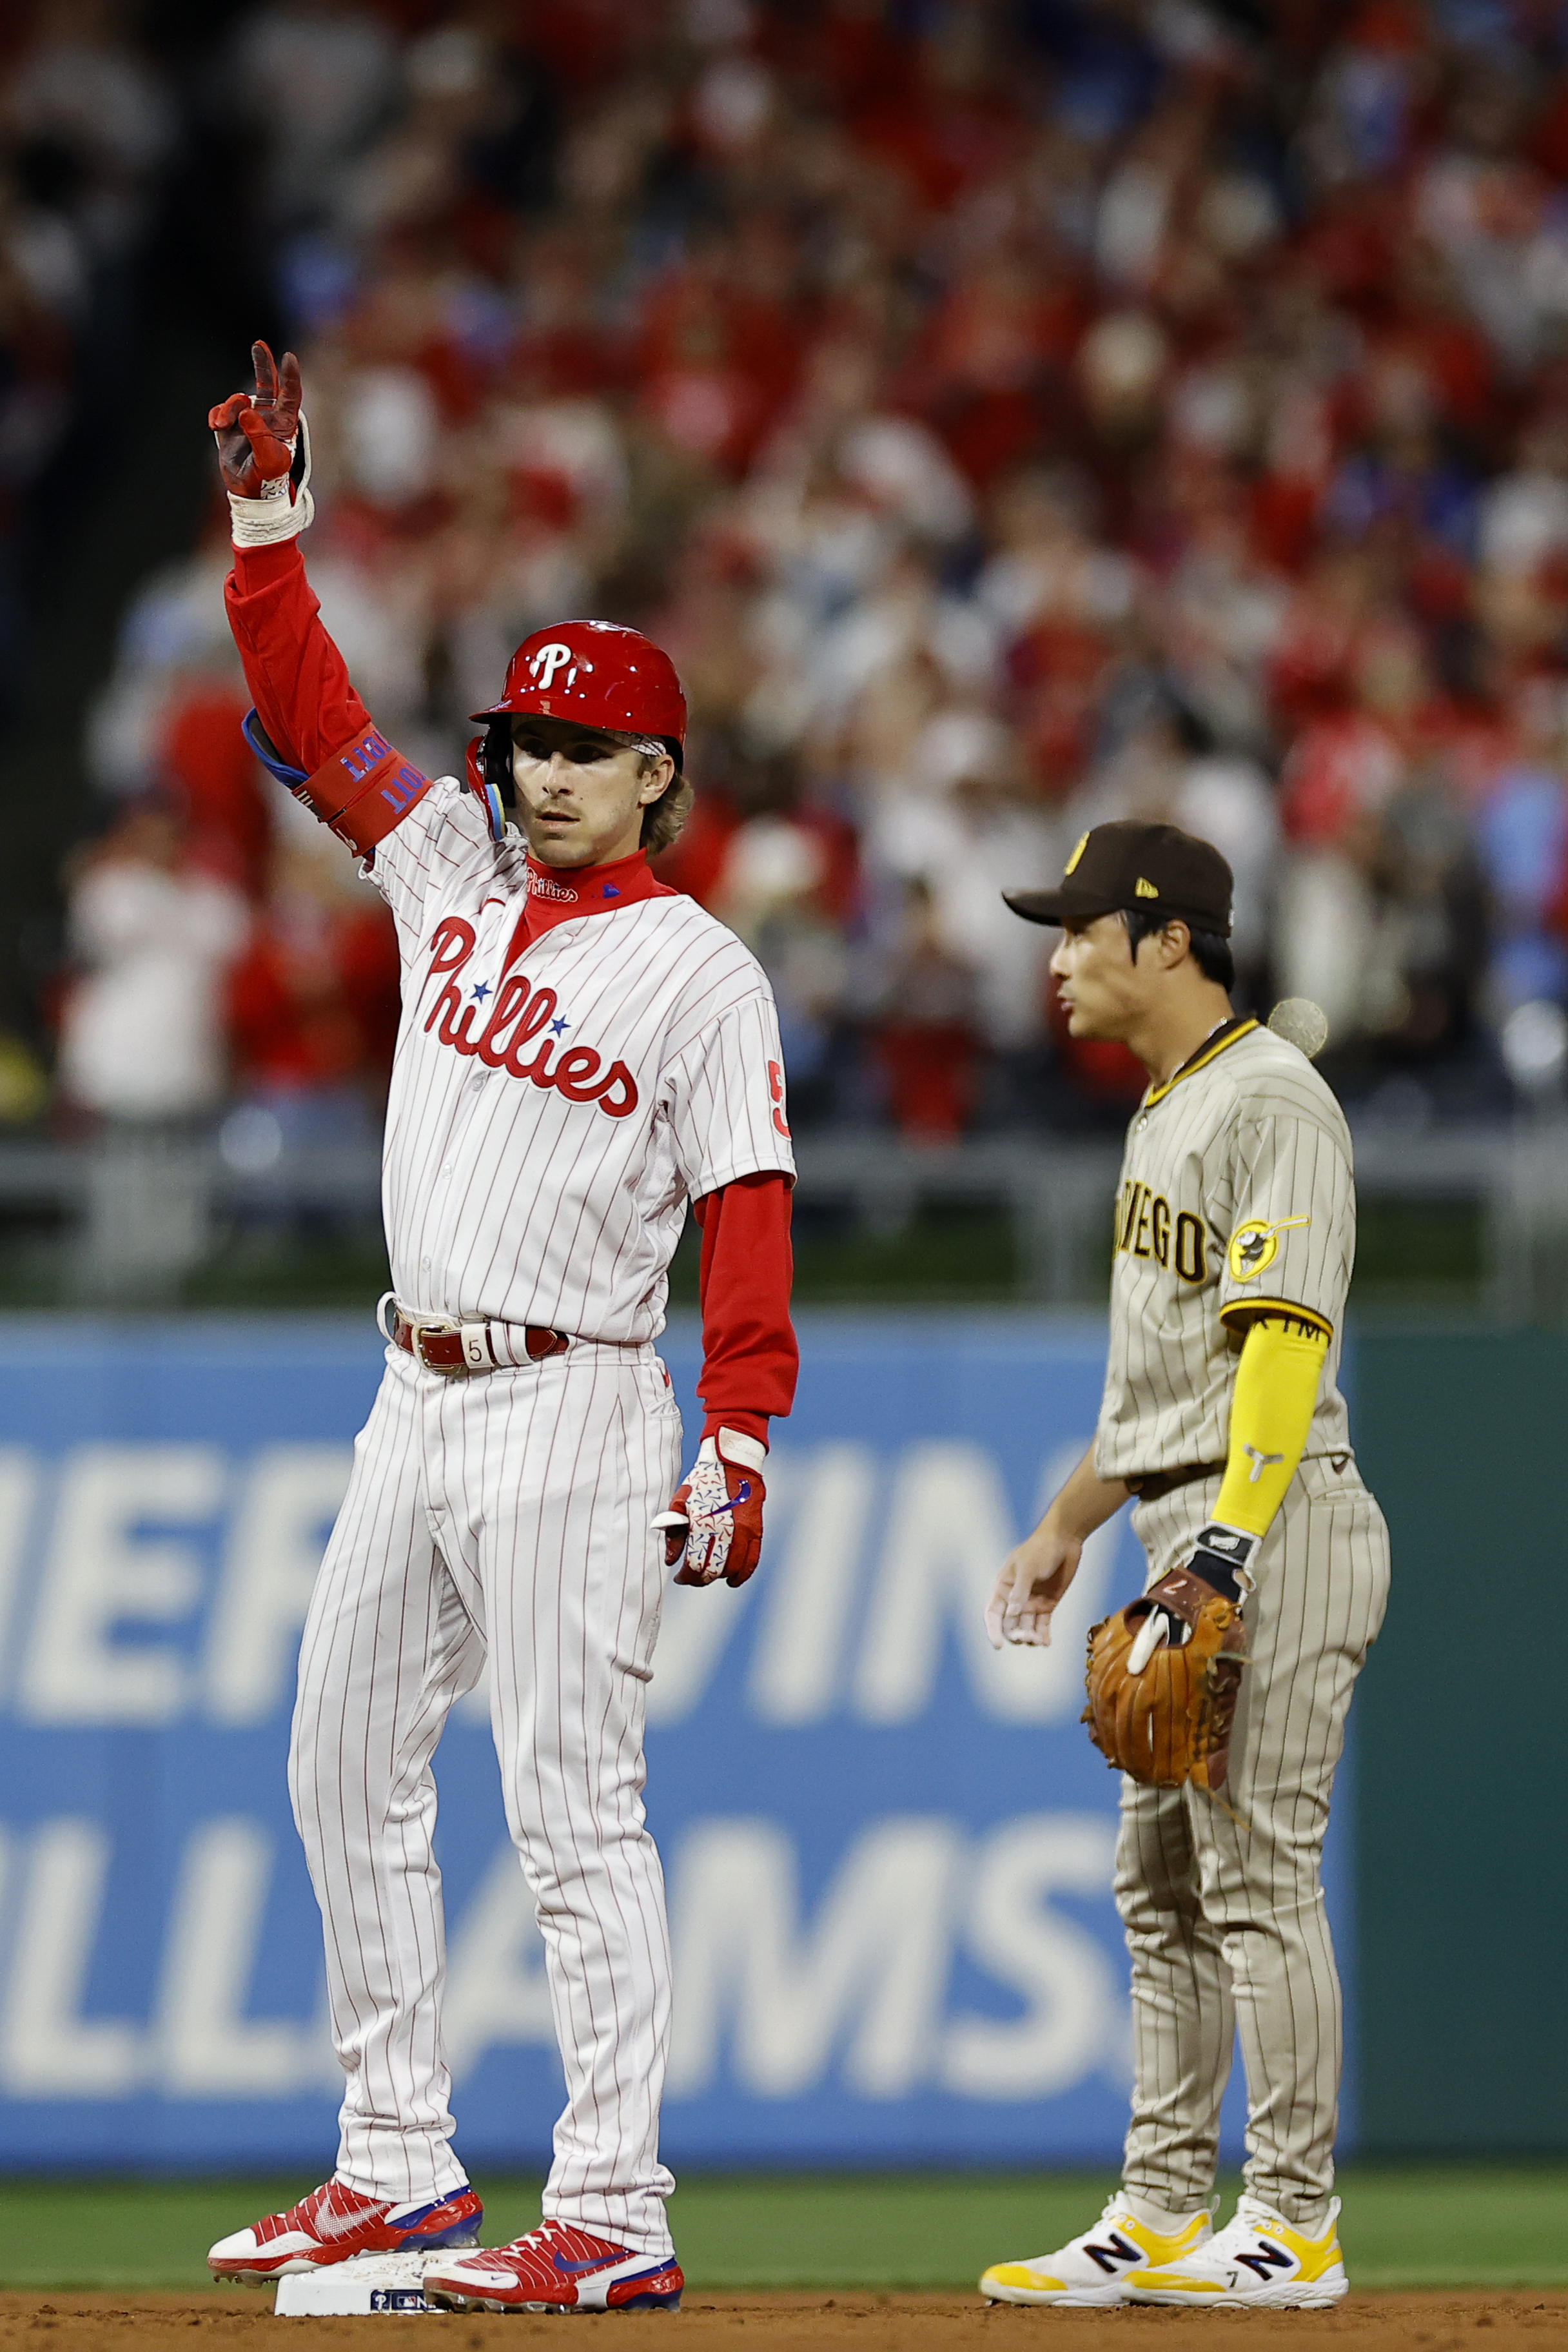 It was everything': Phillies' Seranthony Dominguez rises to the